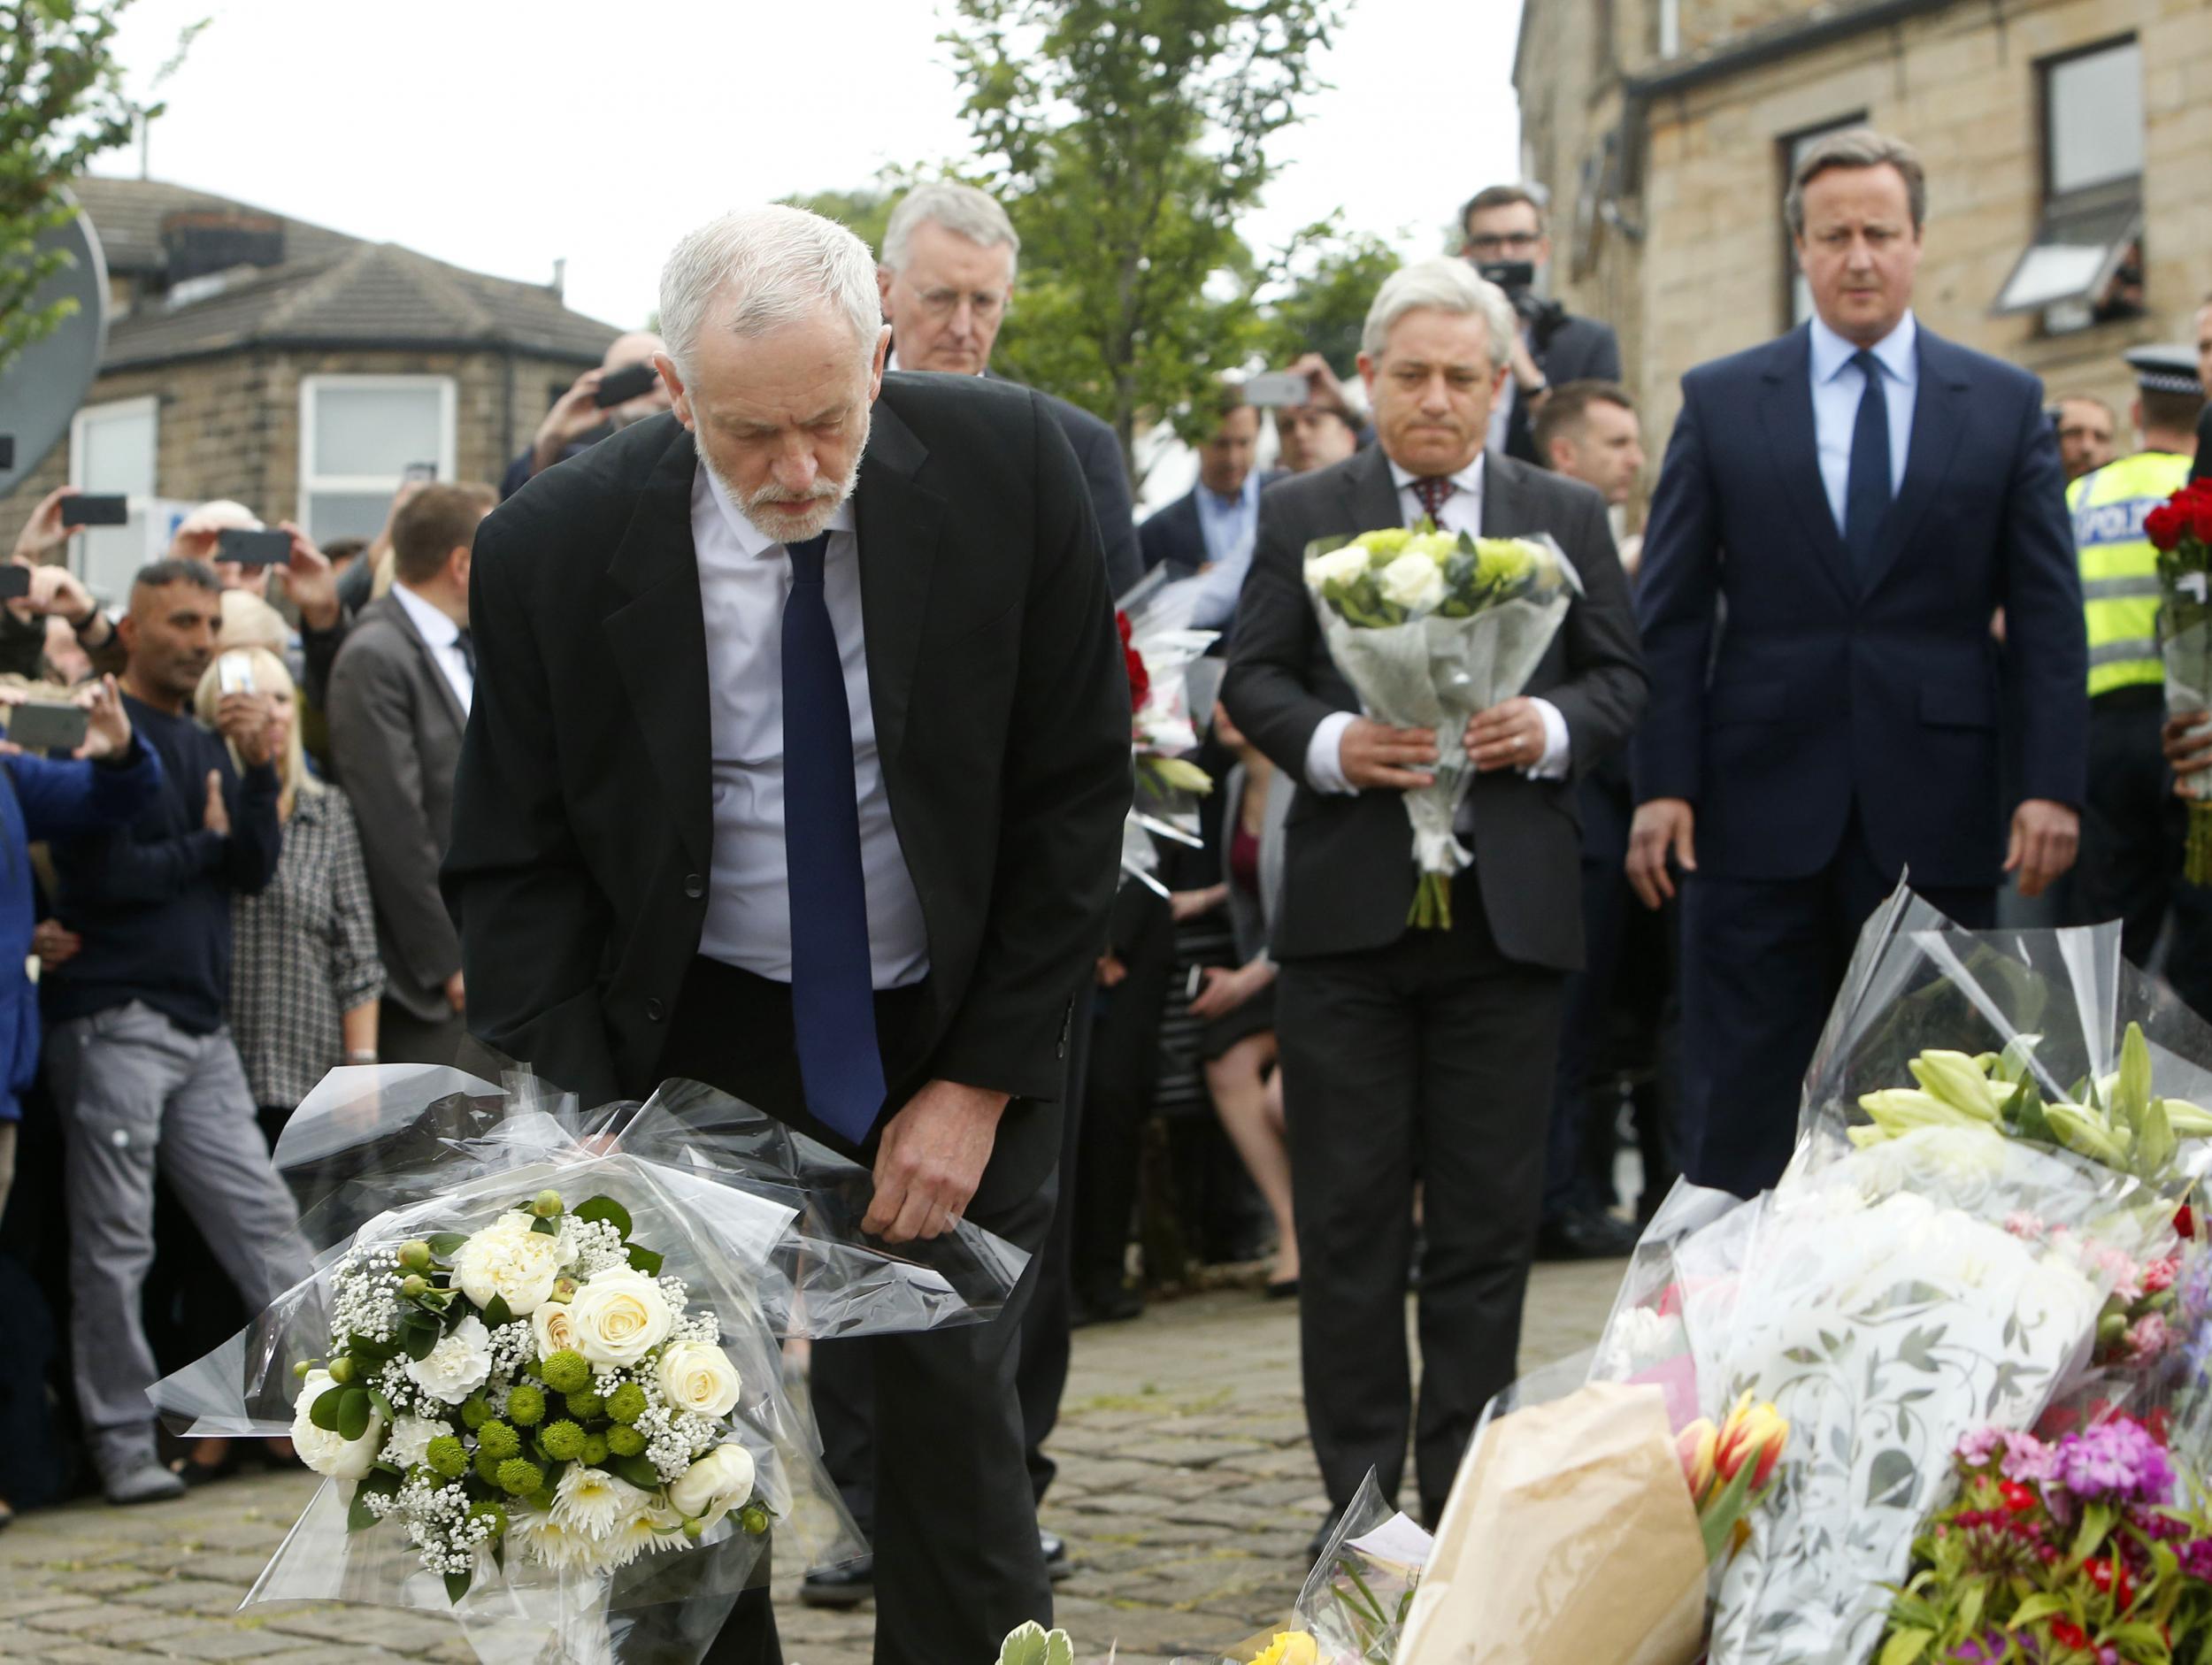 Labour Party leader Jeremy Corbyn lays flowers while Commons Speaker John Bercow and Prime Minister David Cameron look on in Birstall, West Yorkshire, after Labour MP Jo Cox was shot and stabbed to death in the street